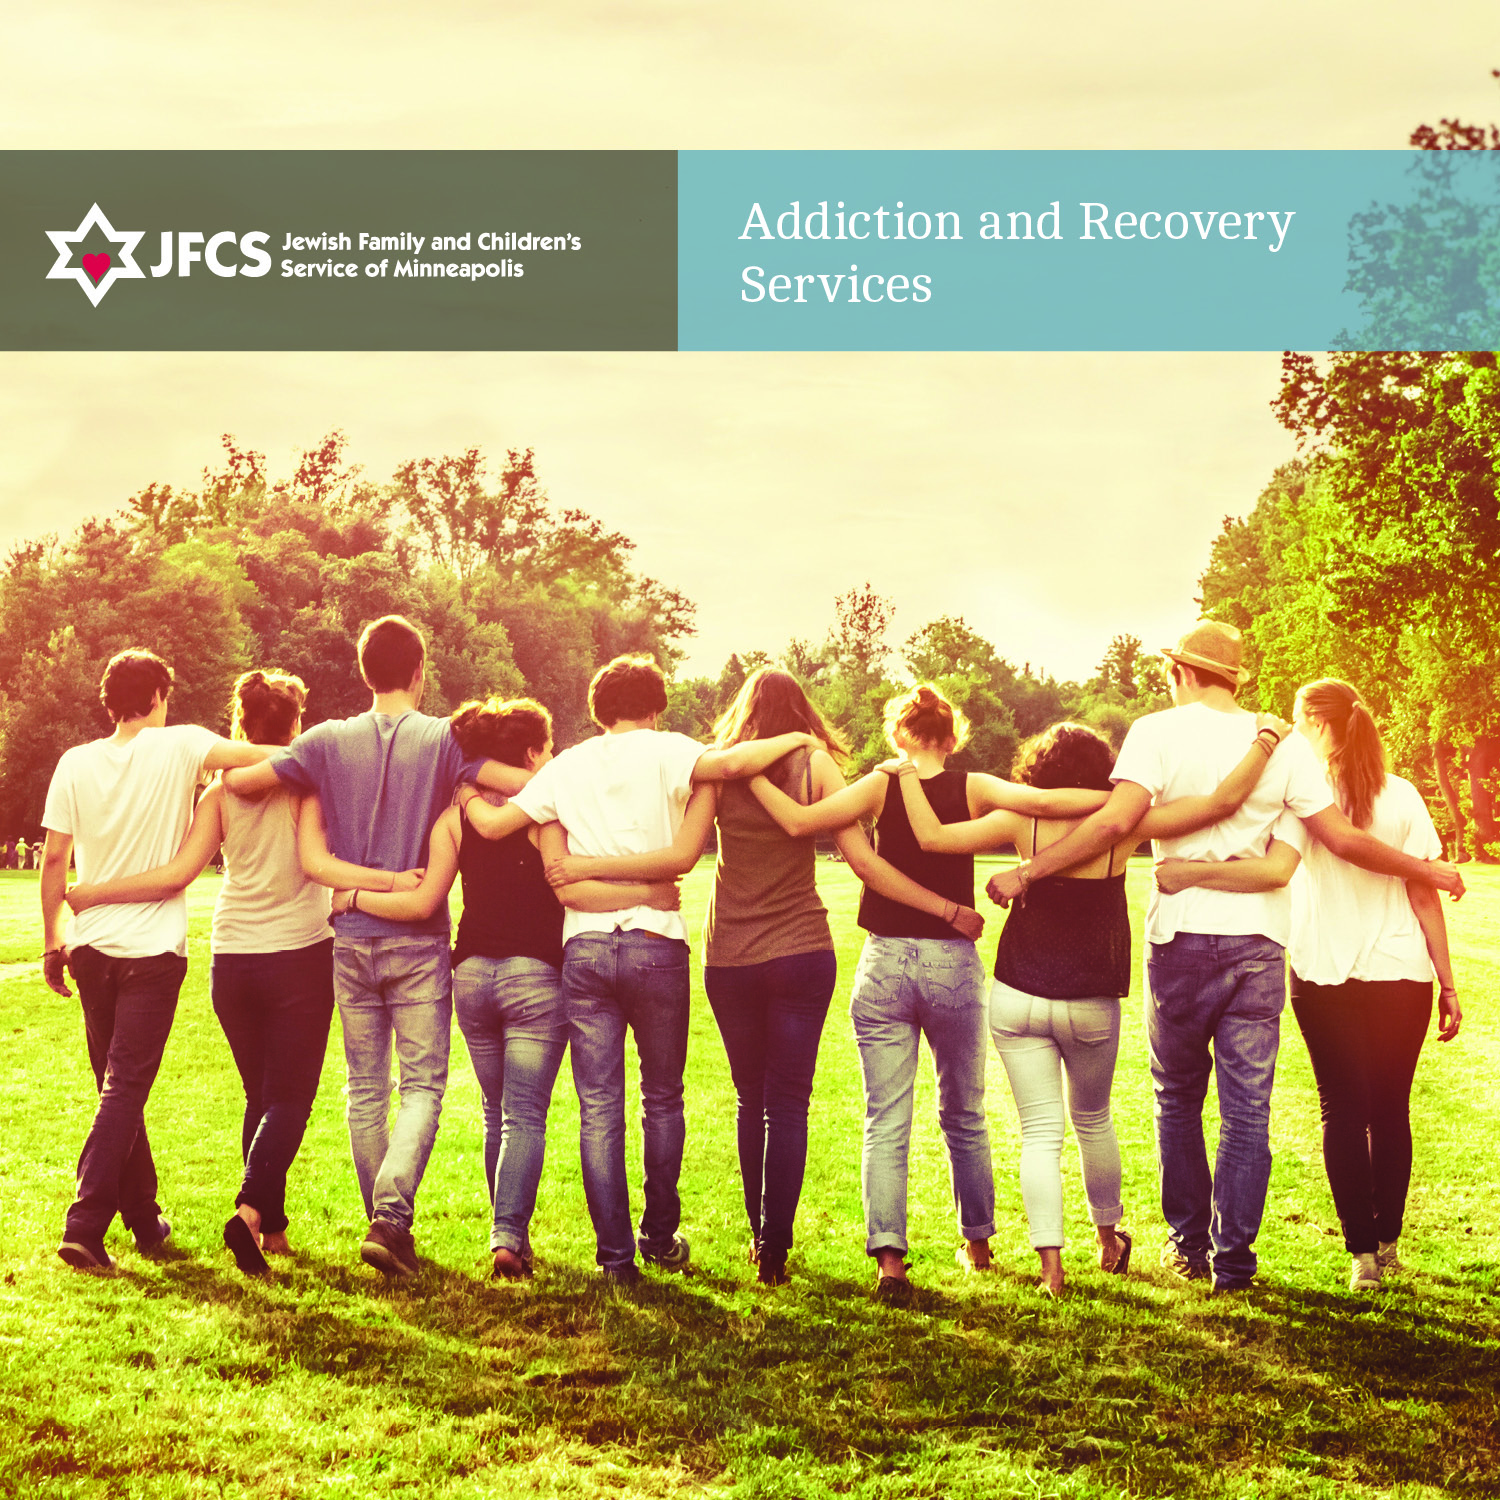 JFCS addiction and recovery services